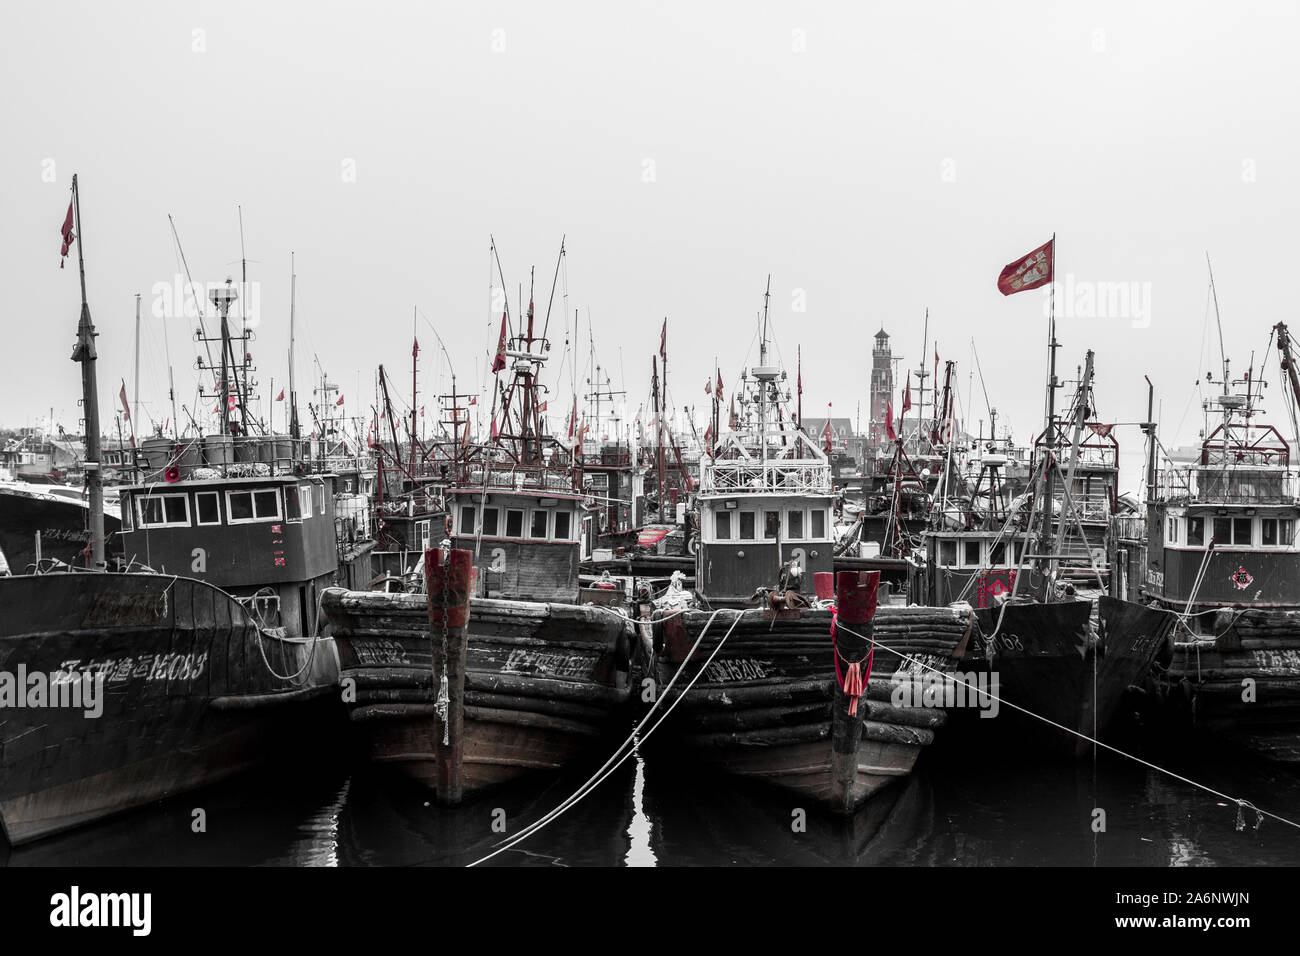 Partially desaturated picture of chinese boats, during cloudy weather, parked in Dalian harbor, China, 22-8-19 Stock Photo